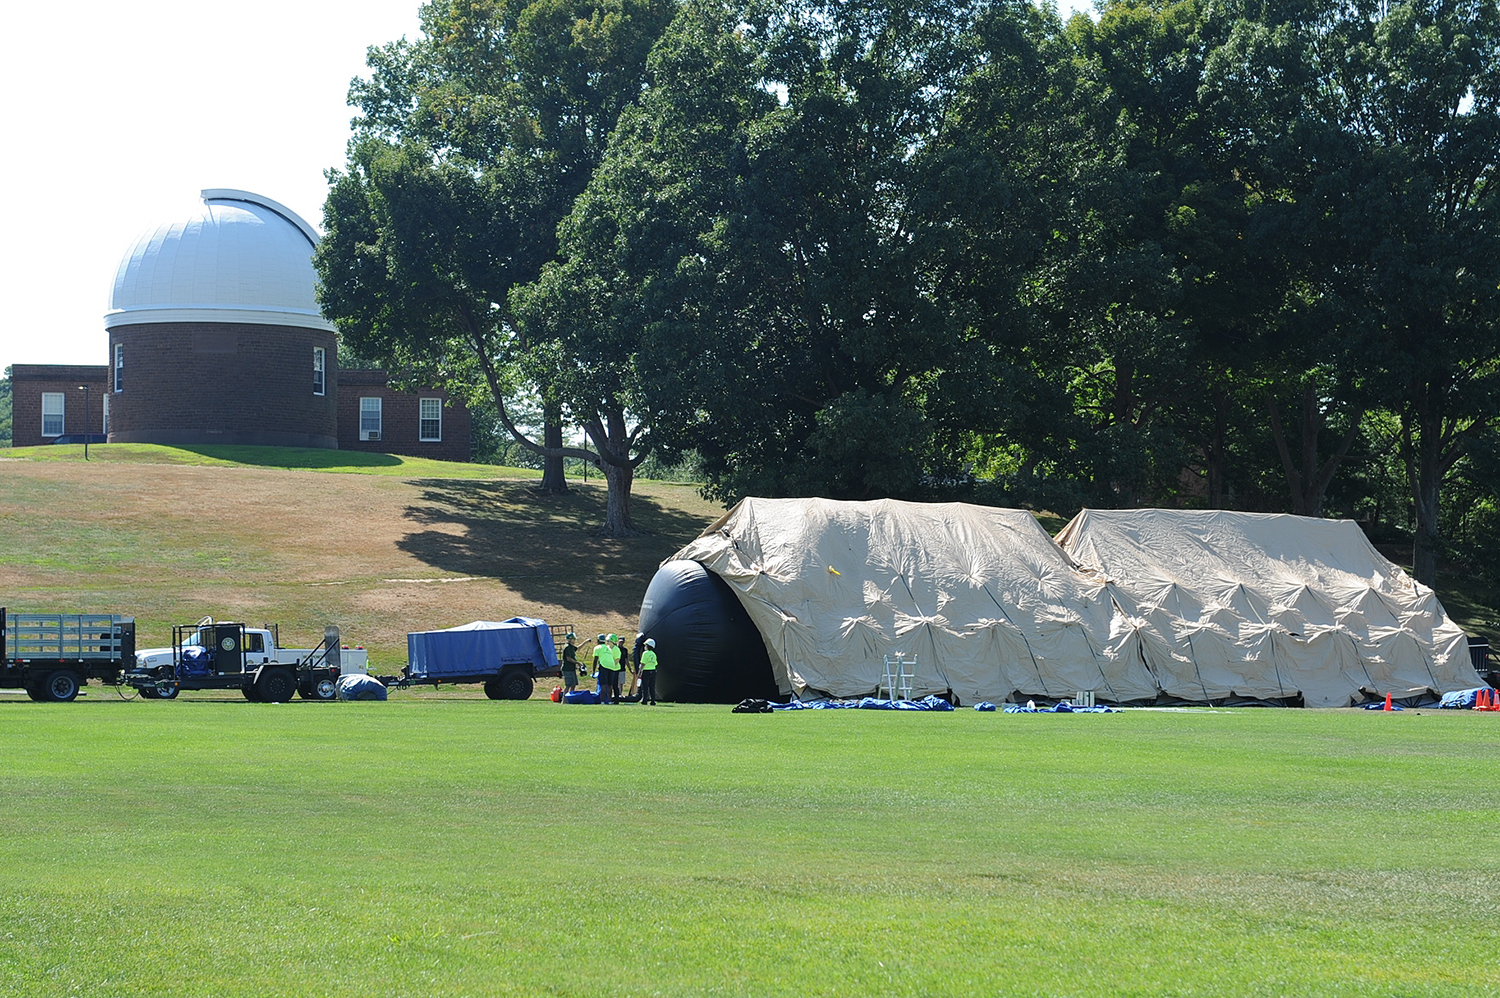 On Aug. 3, more than 20 Wesleyan employees helped erect a tent that could be used as a mobile hospital in the event of an emergency situation. Members of Wesleyan’s Campus Community Emergency Response Team (C-CERT) constructed the mobile unit with guidance from Middletown Emergency Management and Middletown Fire Department.